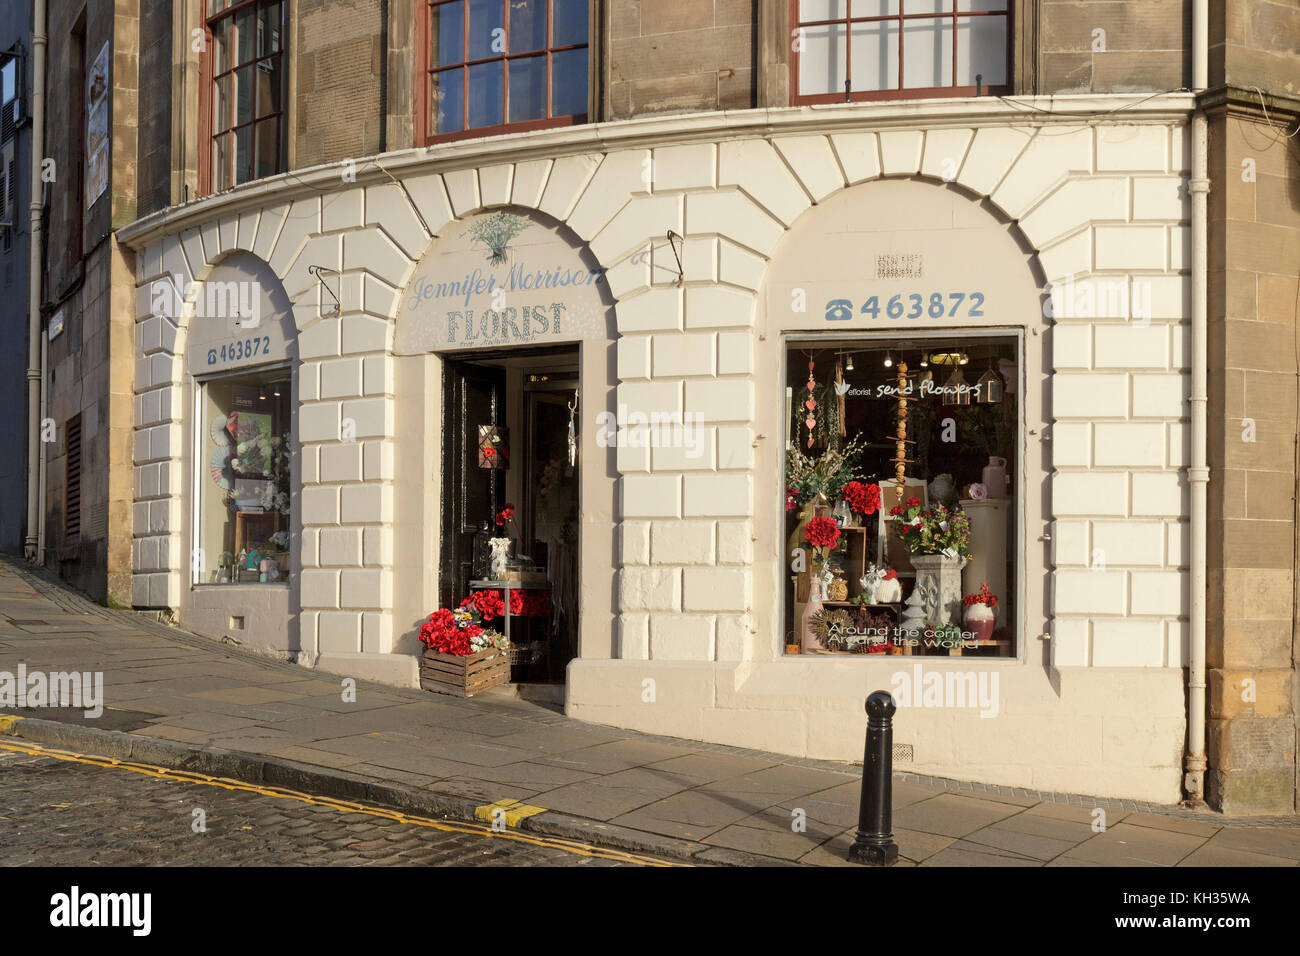 Florist, old town, Stirling, Scotland, Great Britain Stock Photo